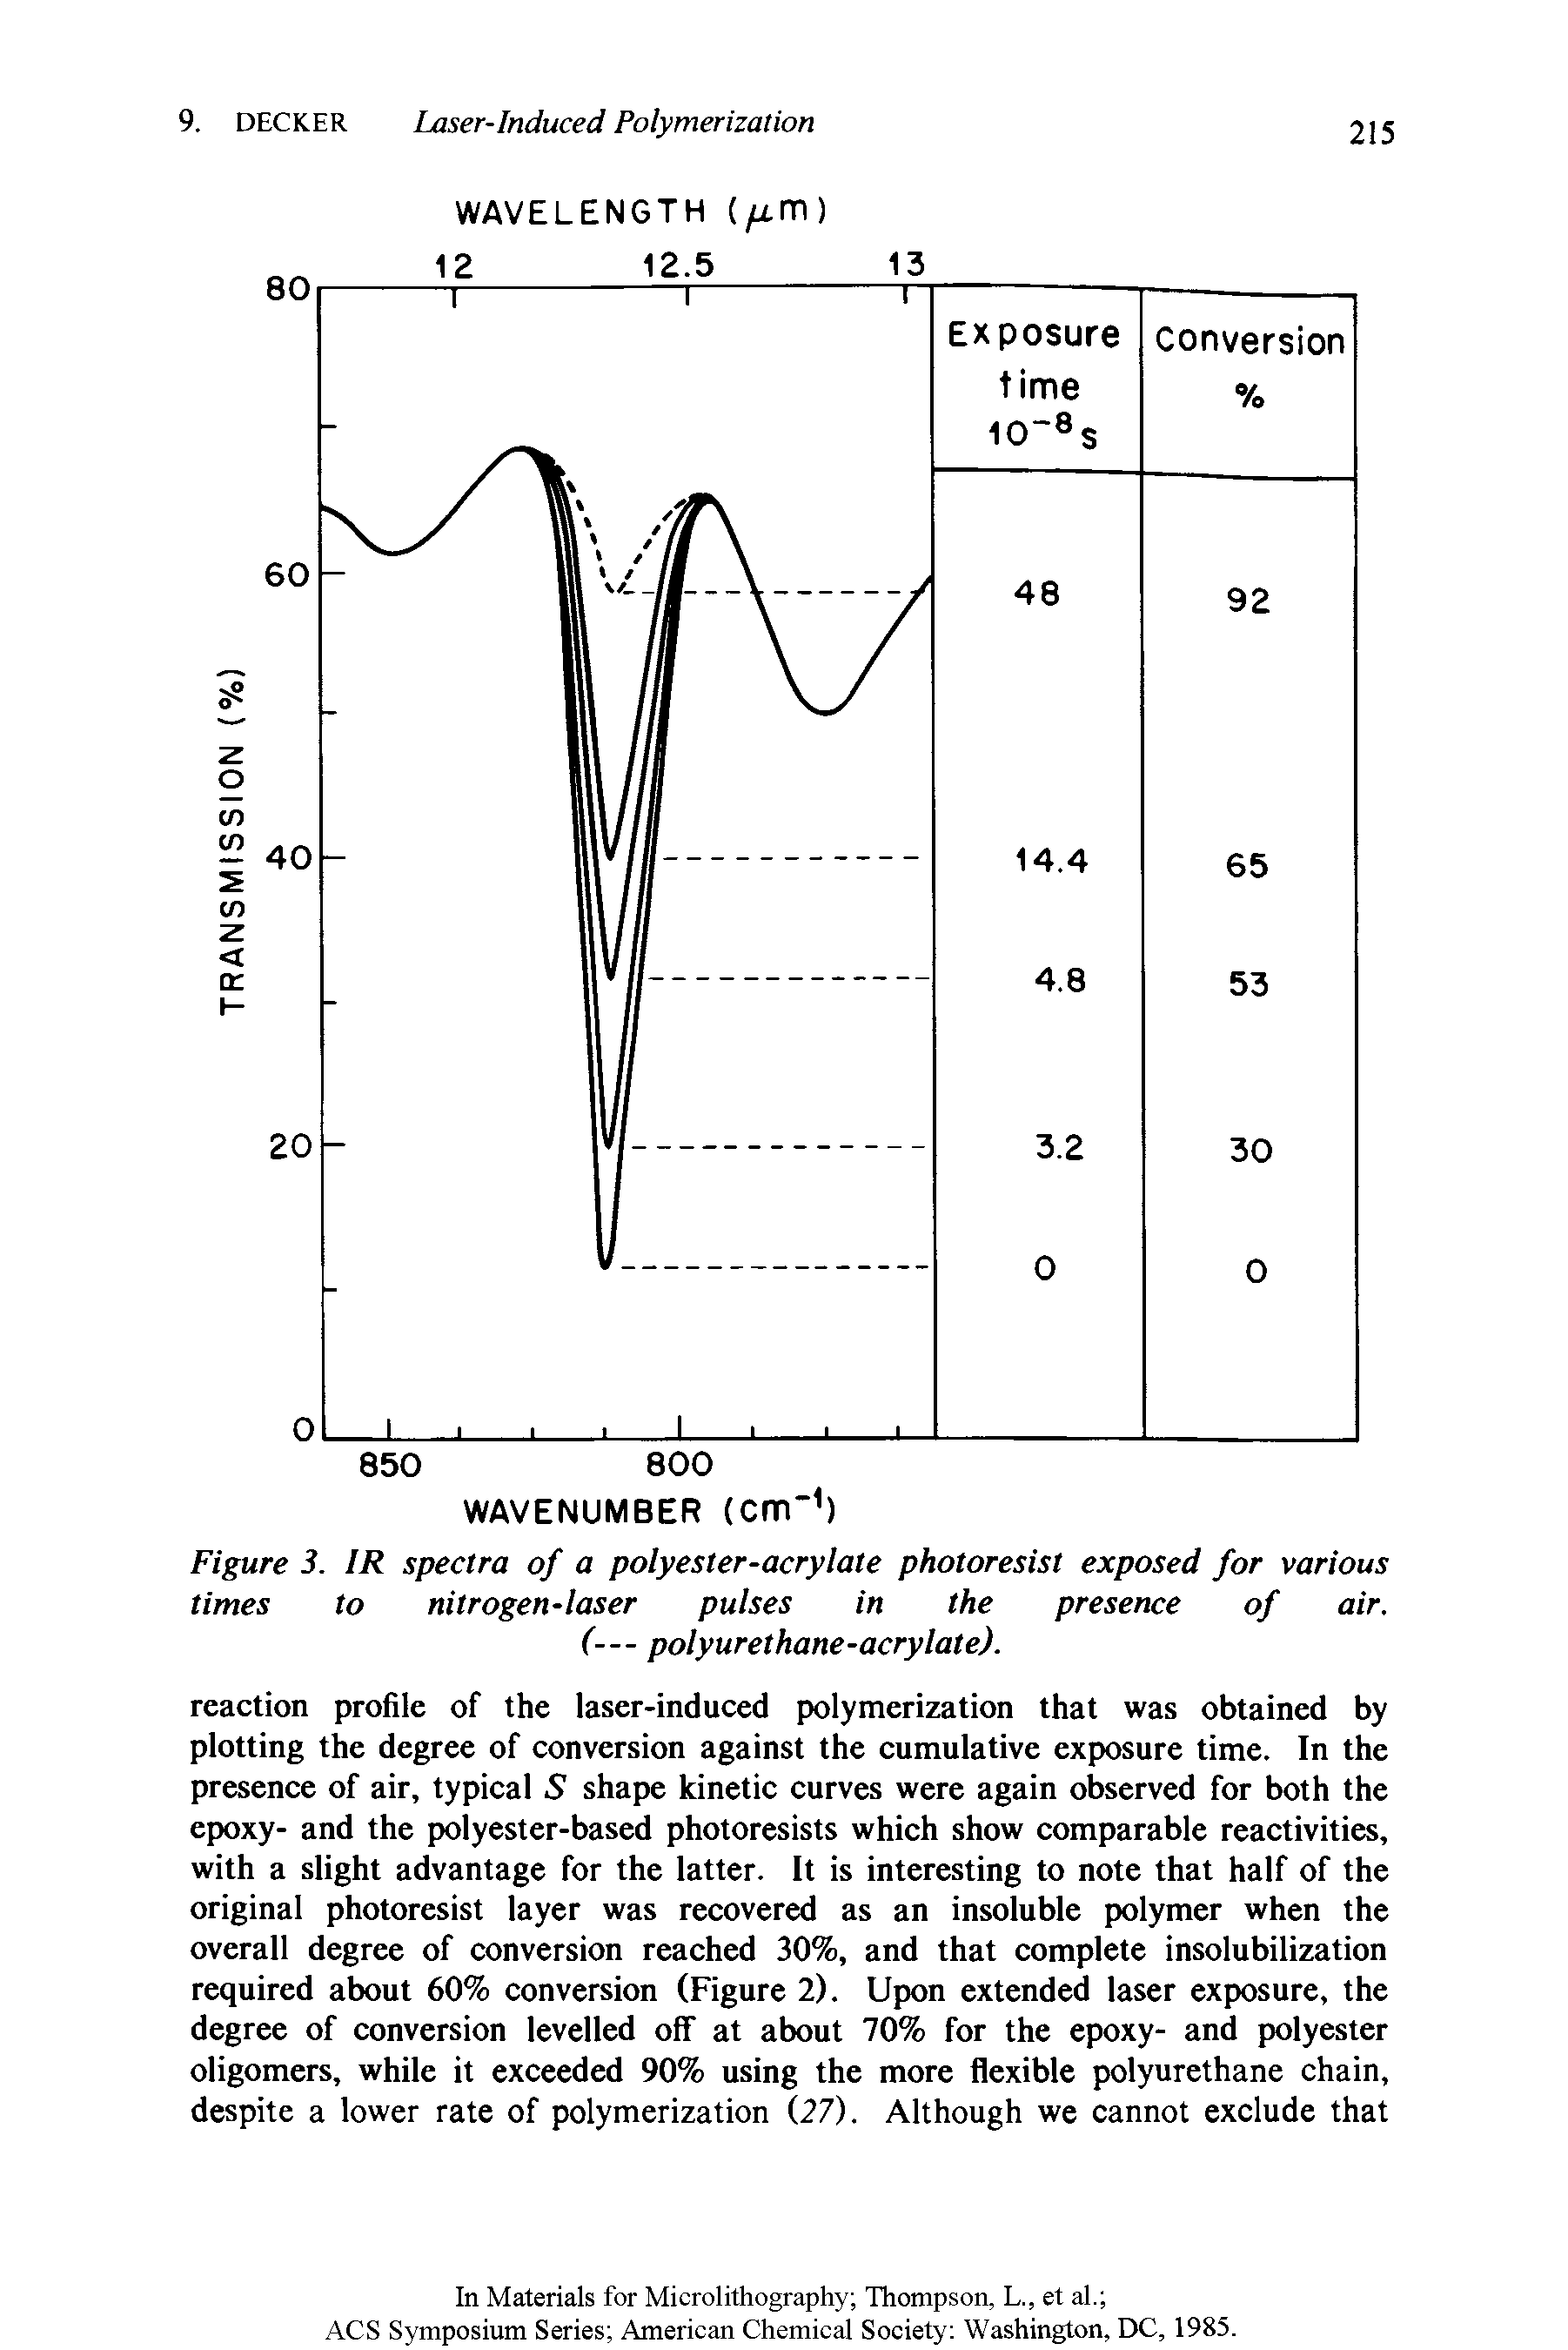 Figure 3. IR spectra of a polyester-acrylate photoresist exposed for various times to nitrogen-laser pulses in the presence of air. (--- polyurethane-acrylate).